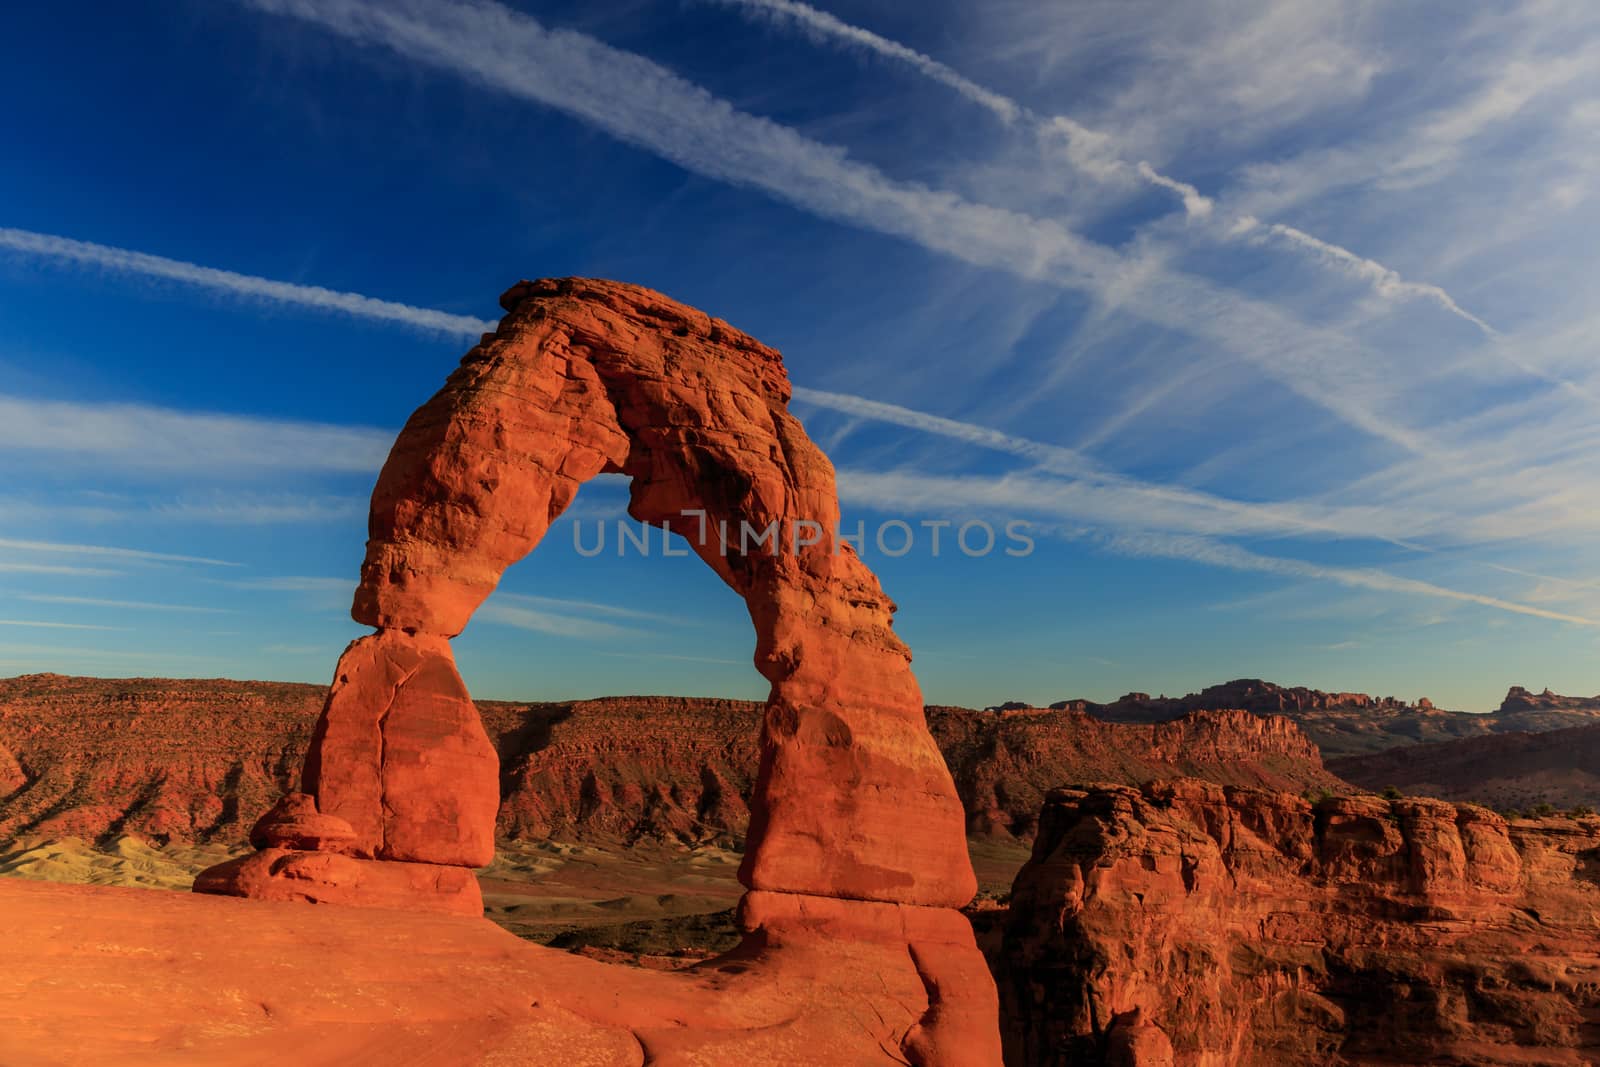 Southwest USA red rock landscape in Arches National Park near Moab Utah